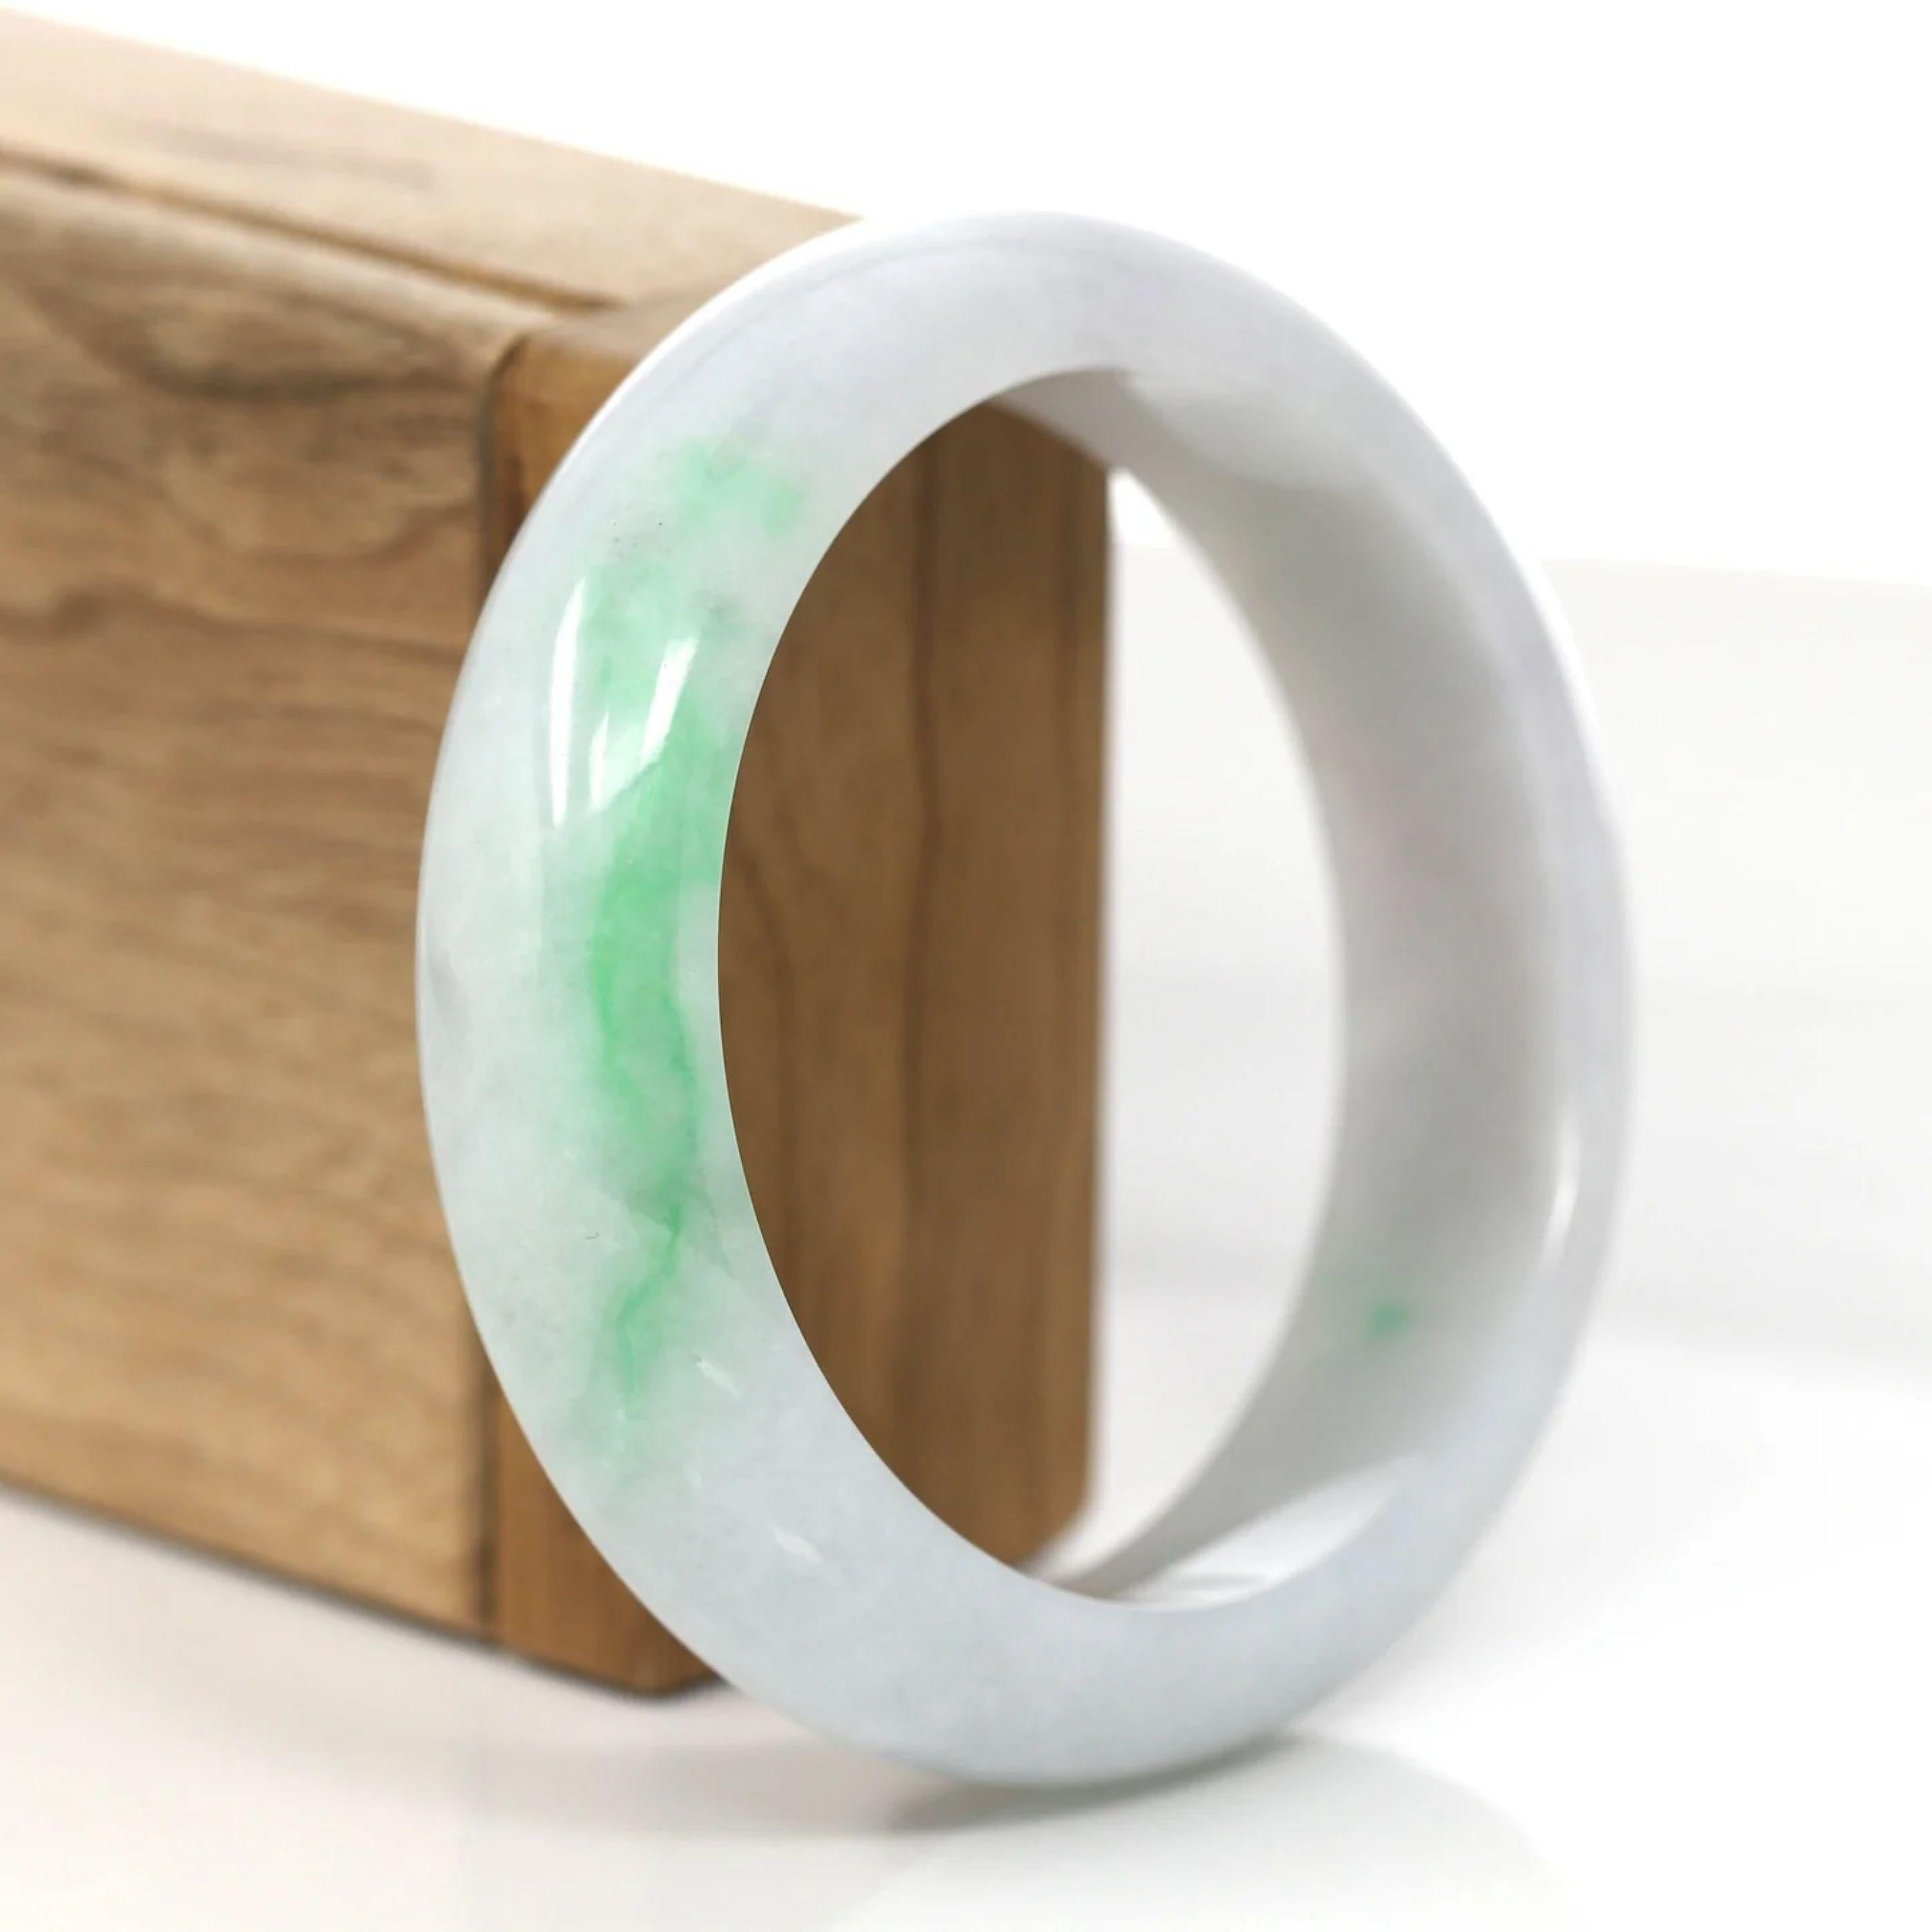 * DETAILS--- This bangle is made with very high-quality genuine Burmese  Jadeite jade. The jade texture is transparent with green & lavender colors inside. The green color and transparency lavender texture are truly a mesmerizing combination. The